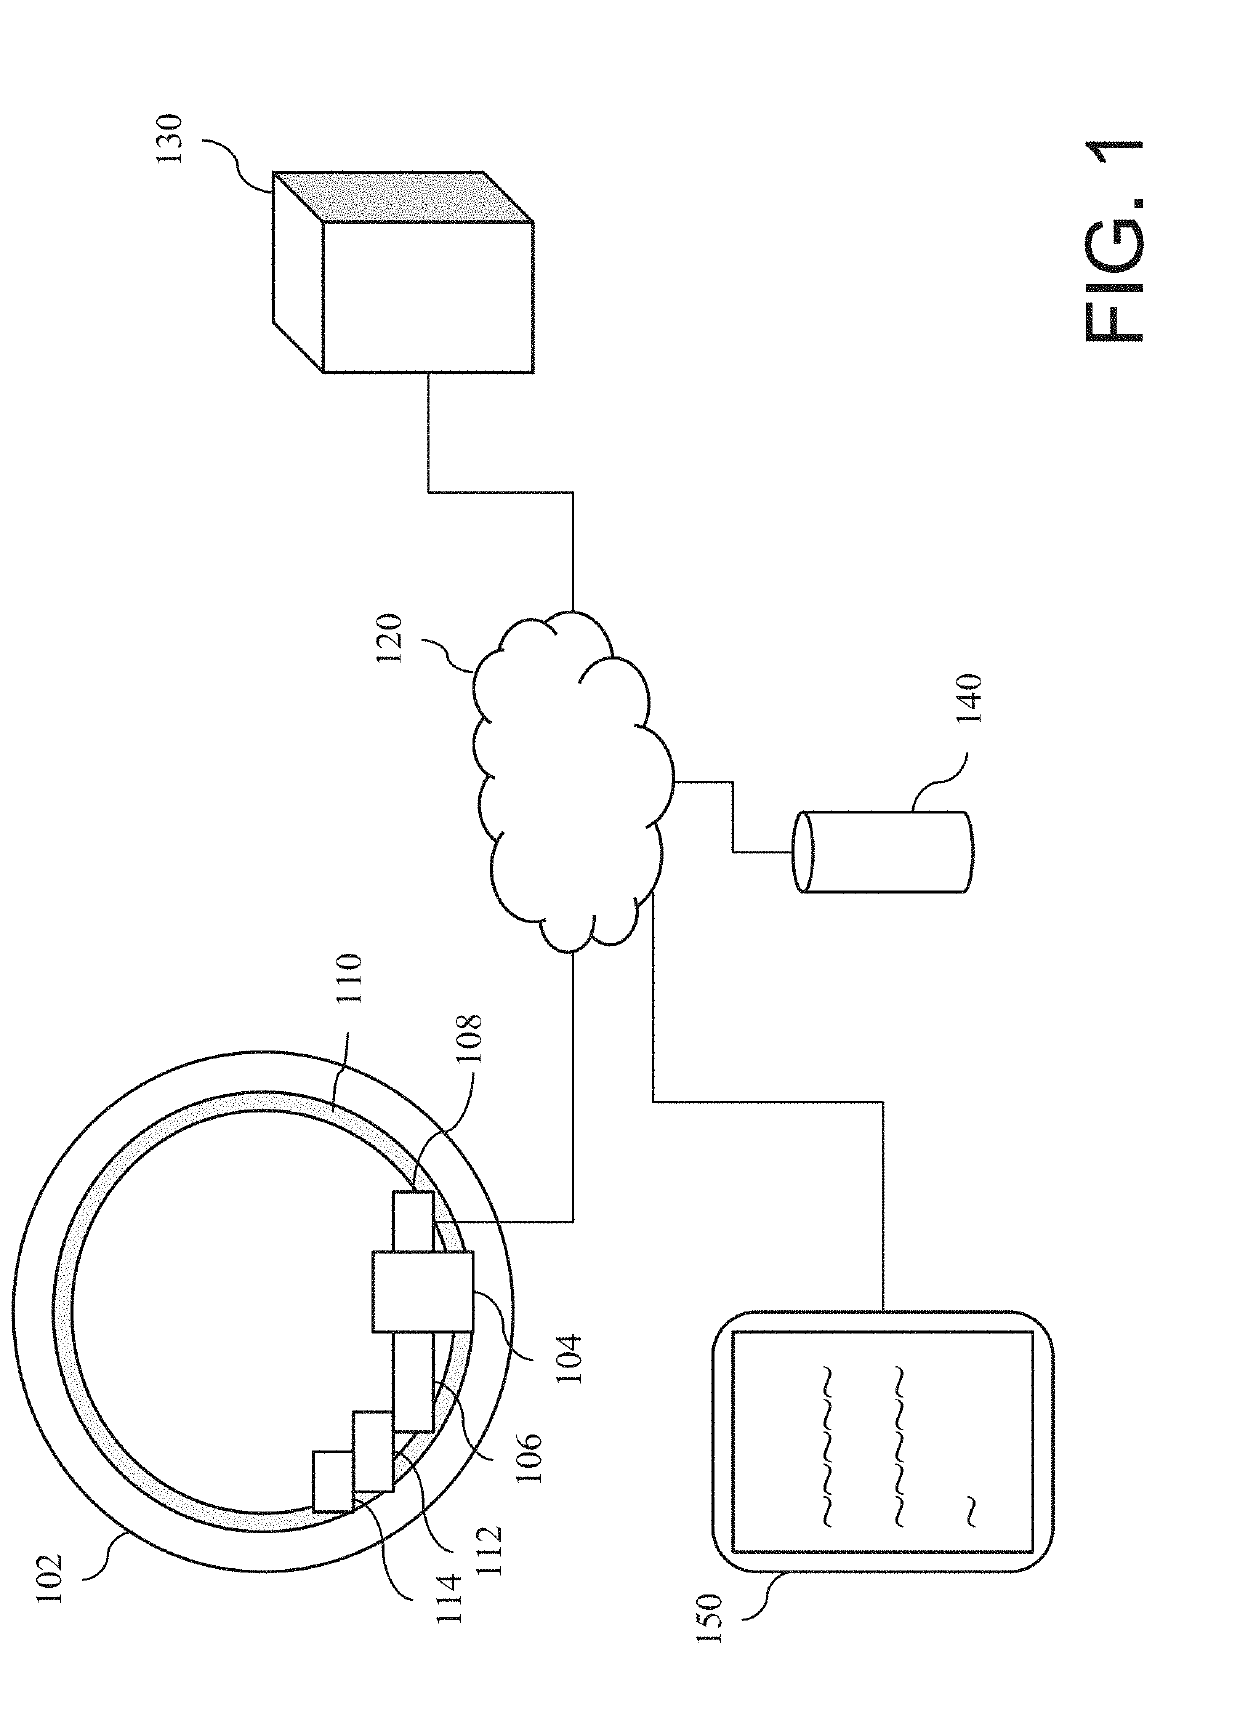 Smart contact lens system with cognitive analysis and aid